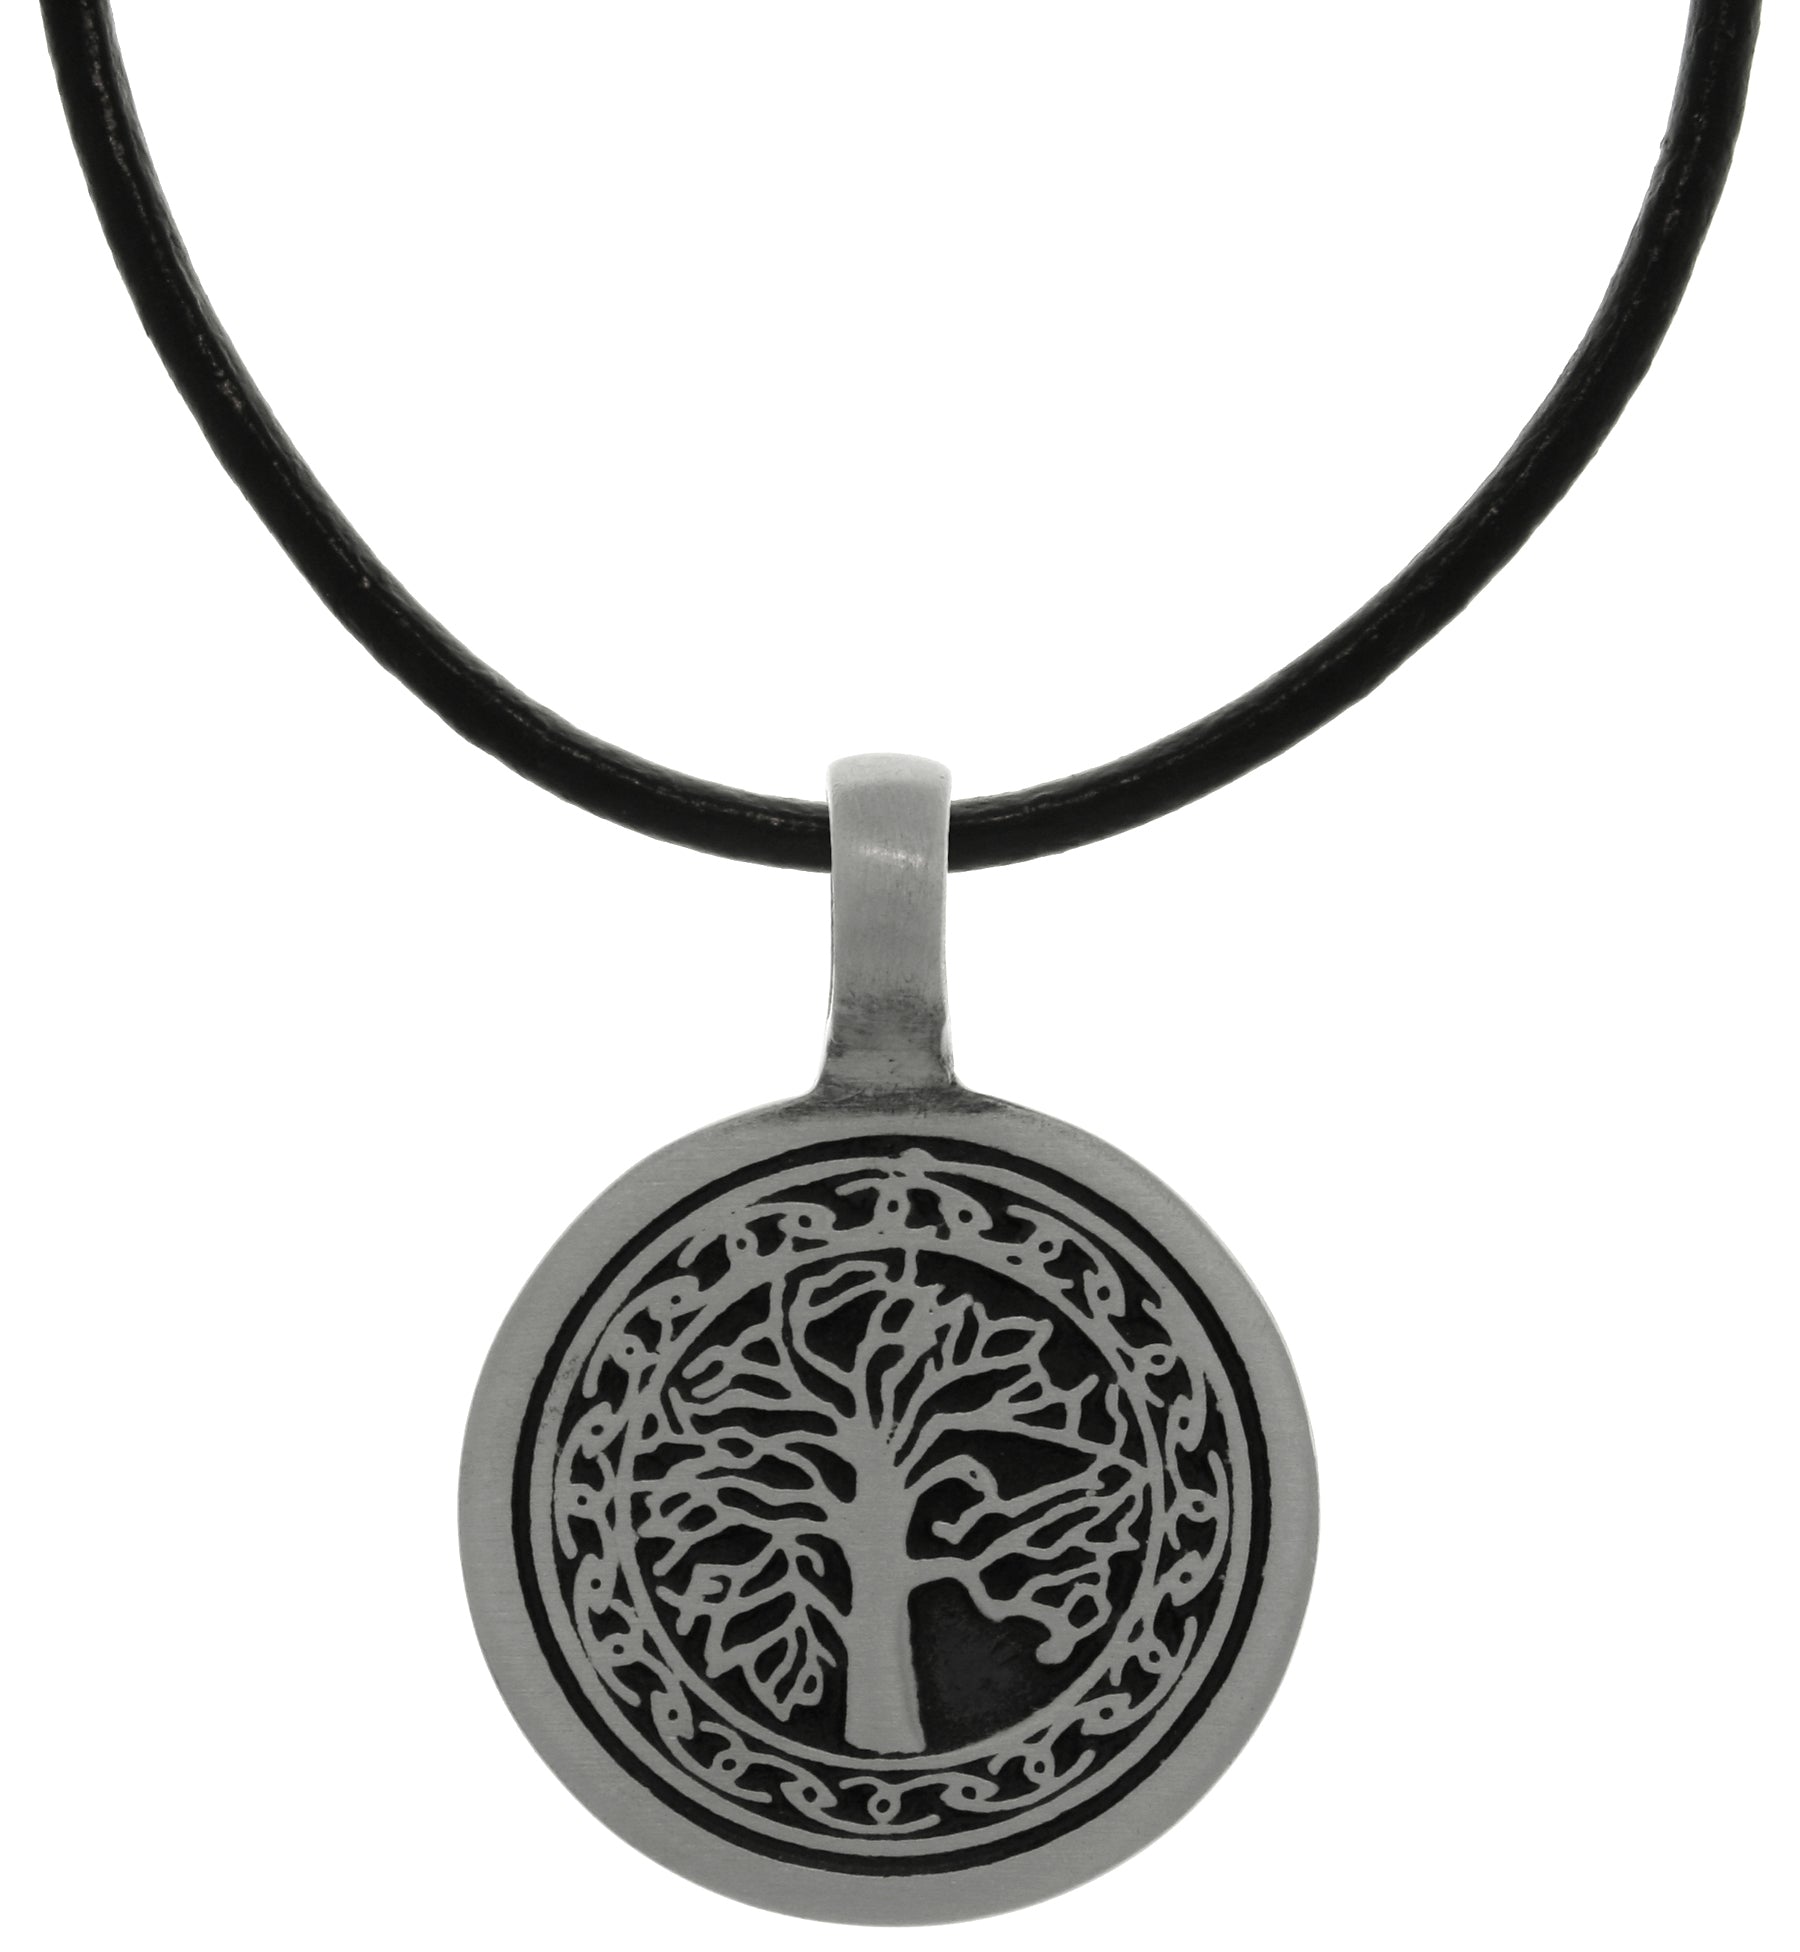 Jewelry Trends Pewter Tree Of Life Pendant with Celtic Knot Design on Black Leather Necklace